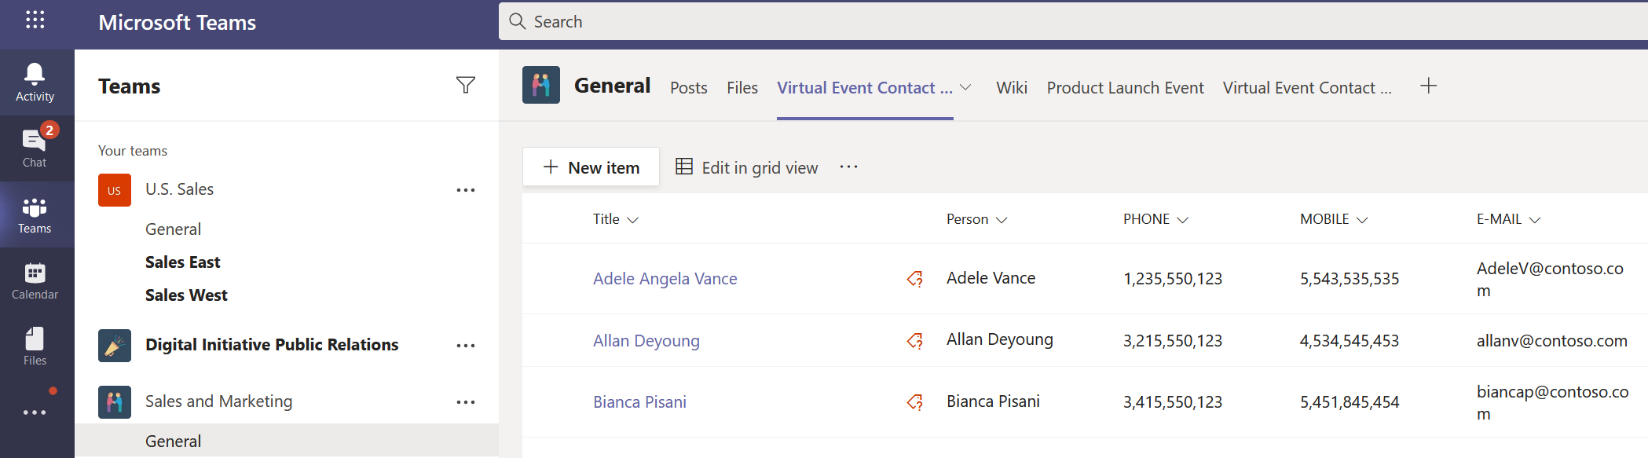 Lists shown in Microsoft Teams